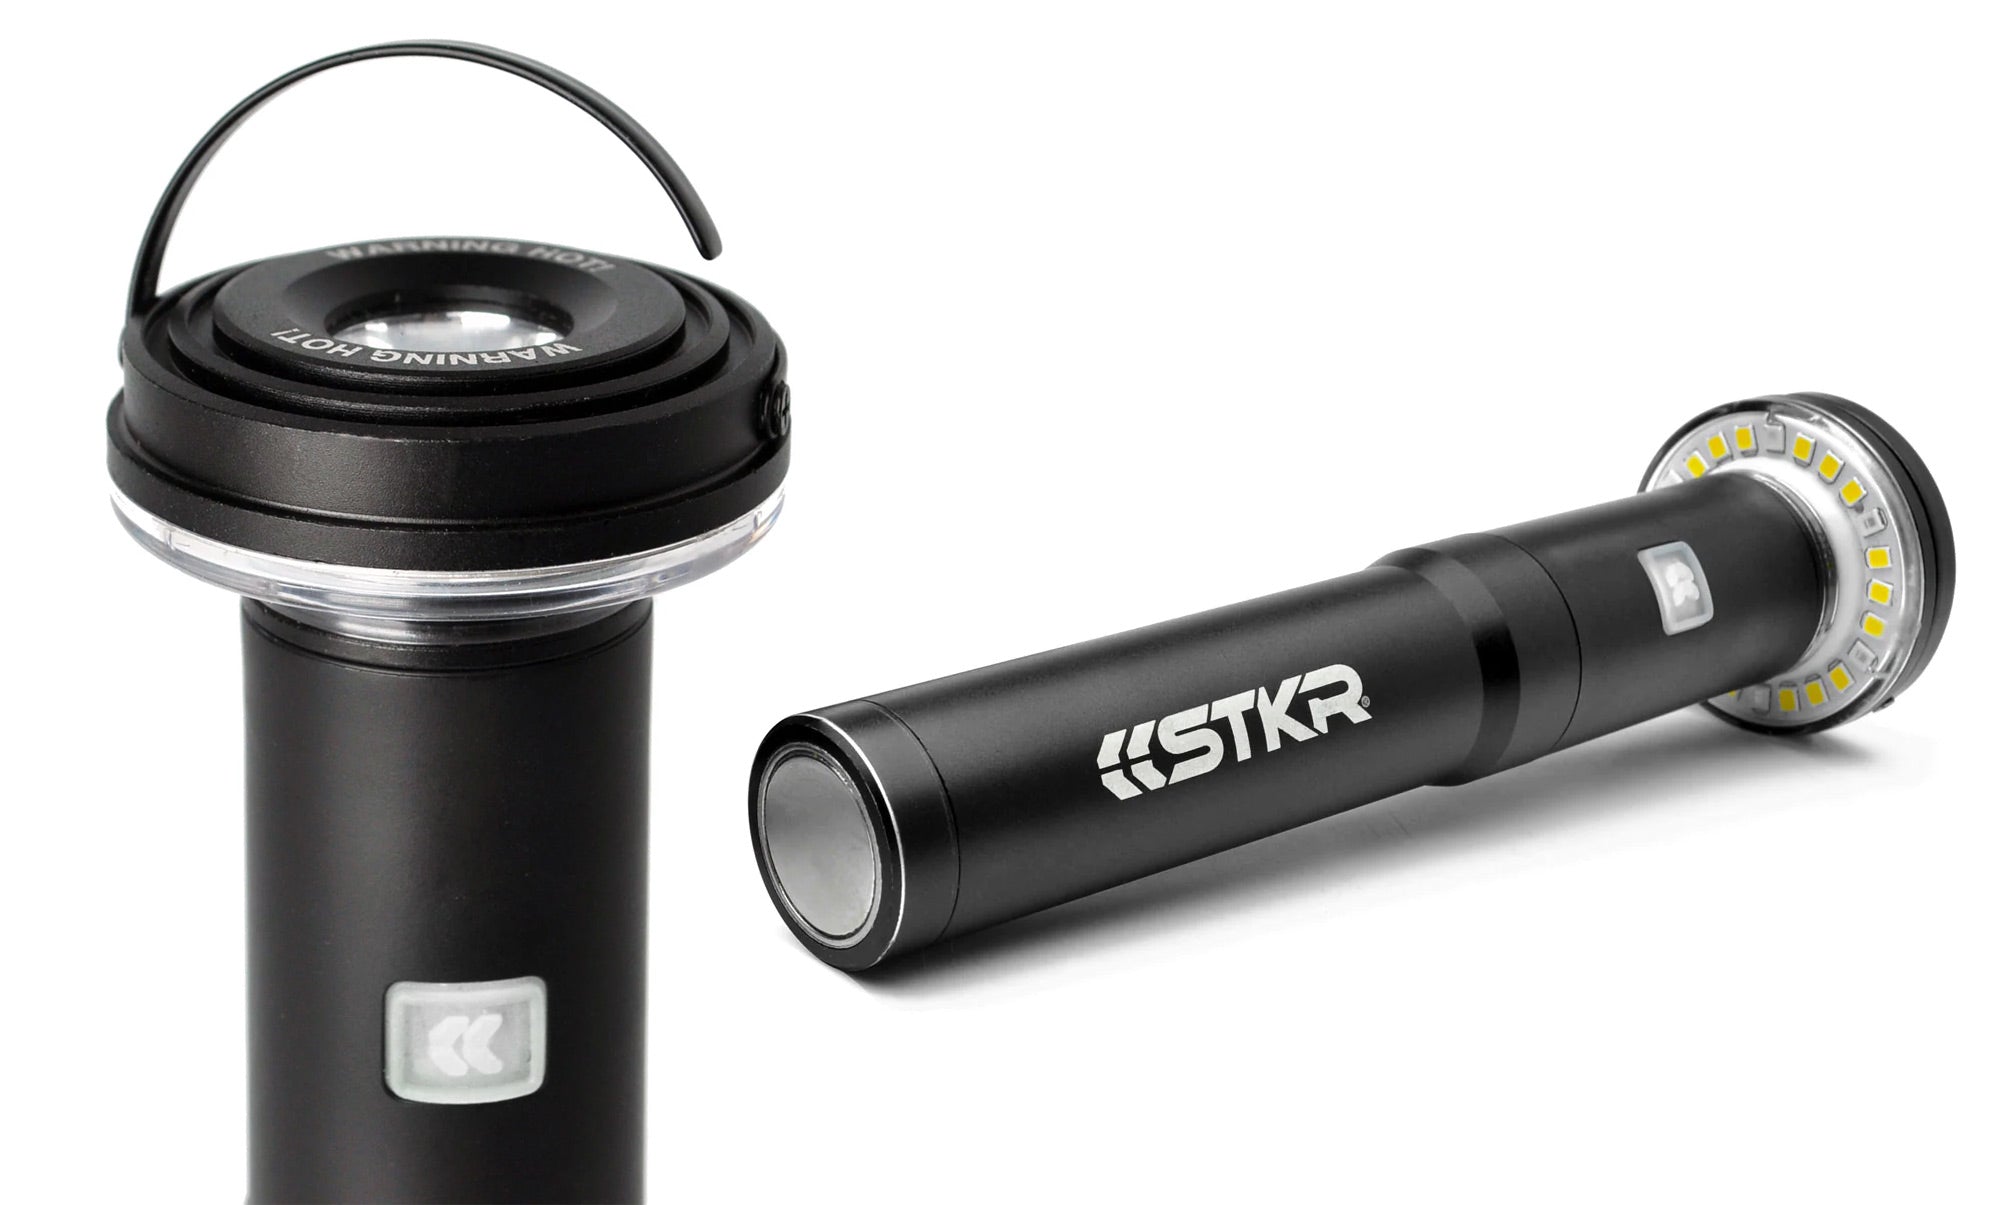 Hanging Hook and magnetic hands free use options | FLi-PRO Telescoping Light by STKR Concepts